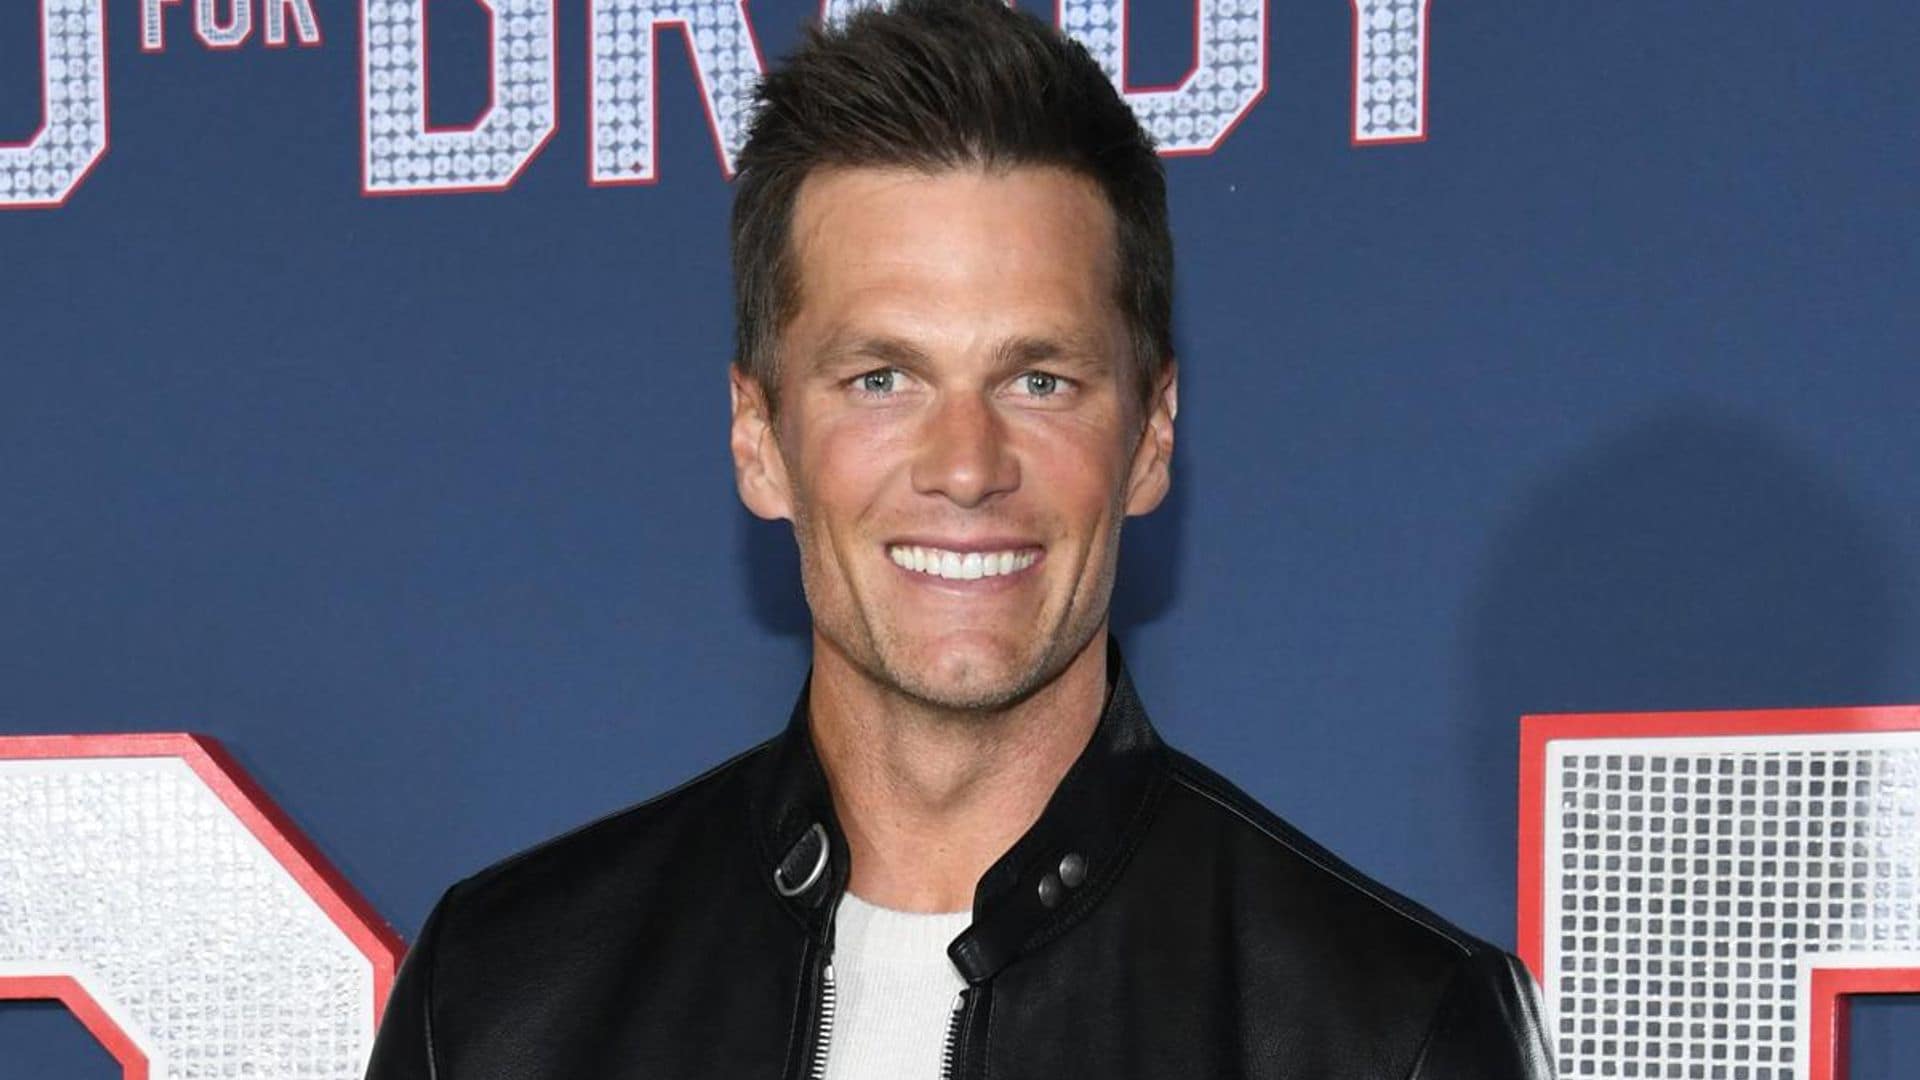 Tom Brady will become an owner of the Las Vegas Raiders